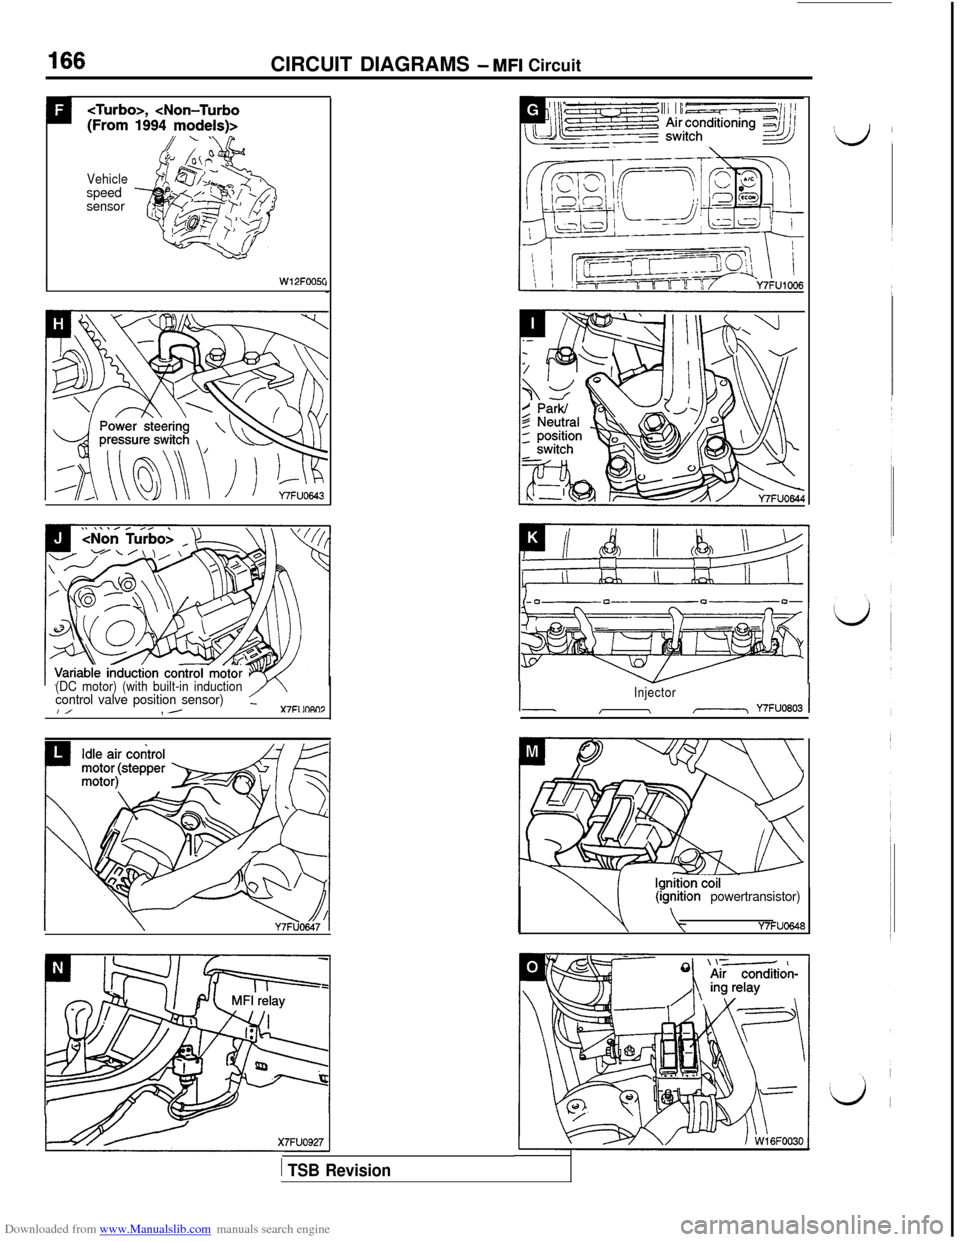 MITSUBISHI 3000GT 1995 2.G Workshop Manual Downloaded from www.Manualslib.com manuals search engine CIRCUIT DIAGRAMS - MFI Circuit
<Turbo>, <Non-Turbo(From 1994 models)>
Vehiclespeed
sensor
IW12FOOSC
(DC motor) (with built-in inductioncontrol 